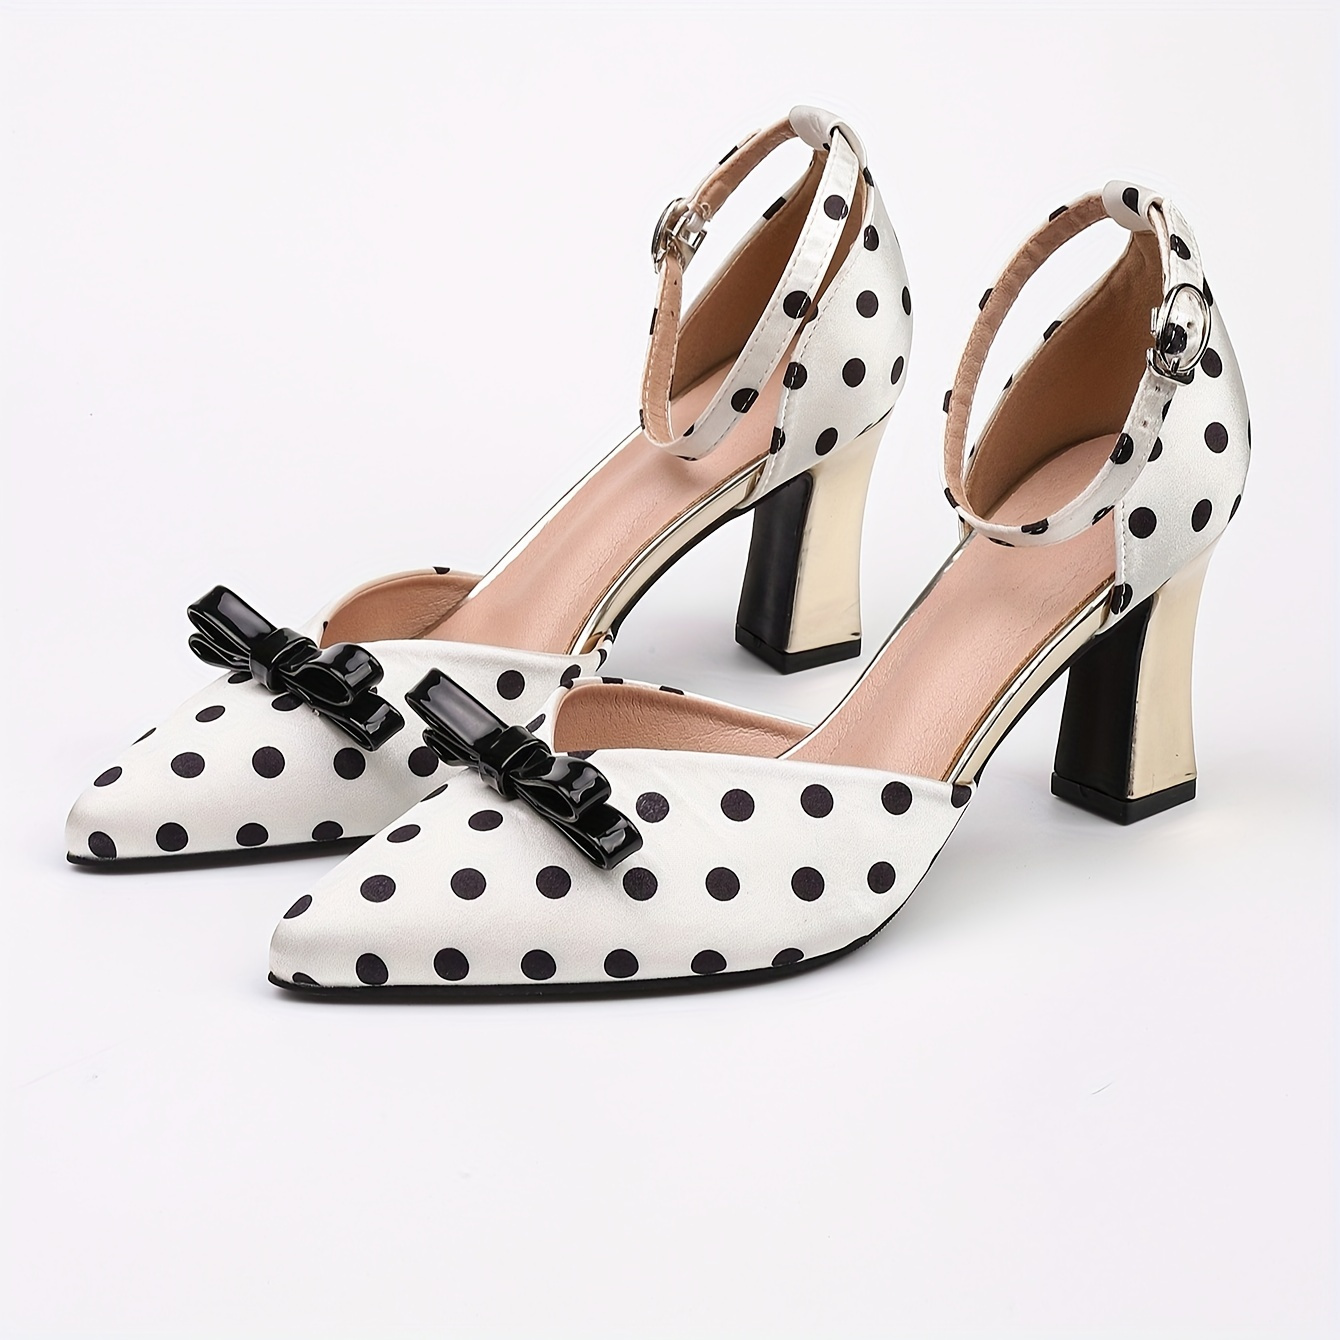 

Women's Polka Dot Pumps, Pointed Toe Chunky Heel Slingback With Adjustable Strap, Cut-out Vintage Preppy Style